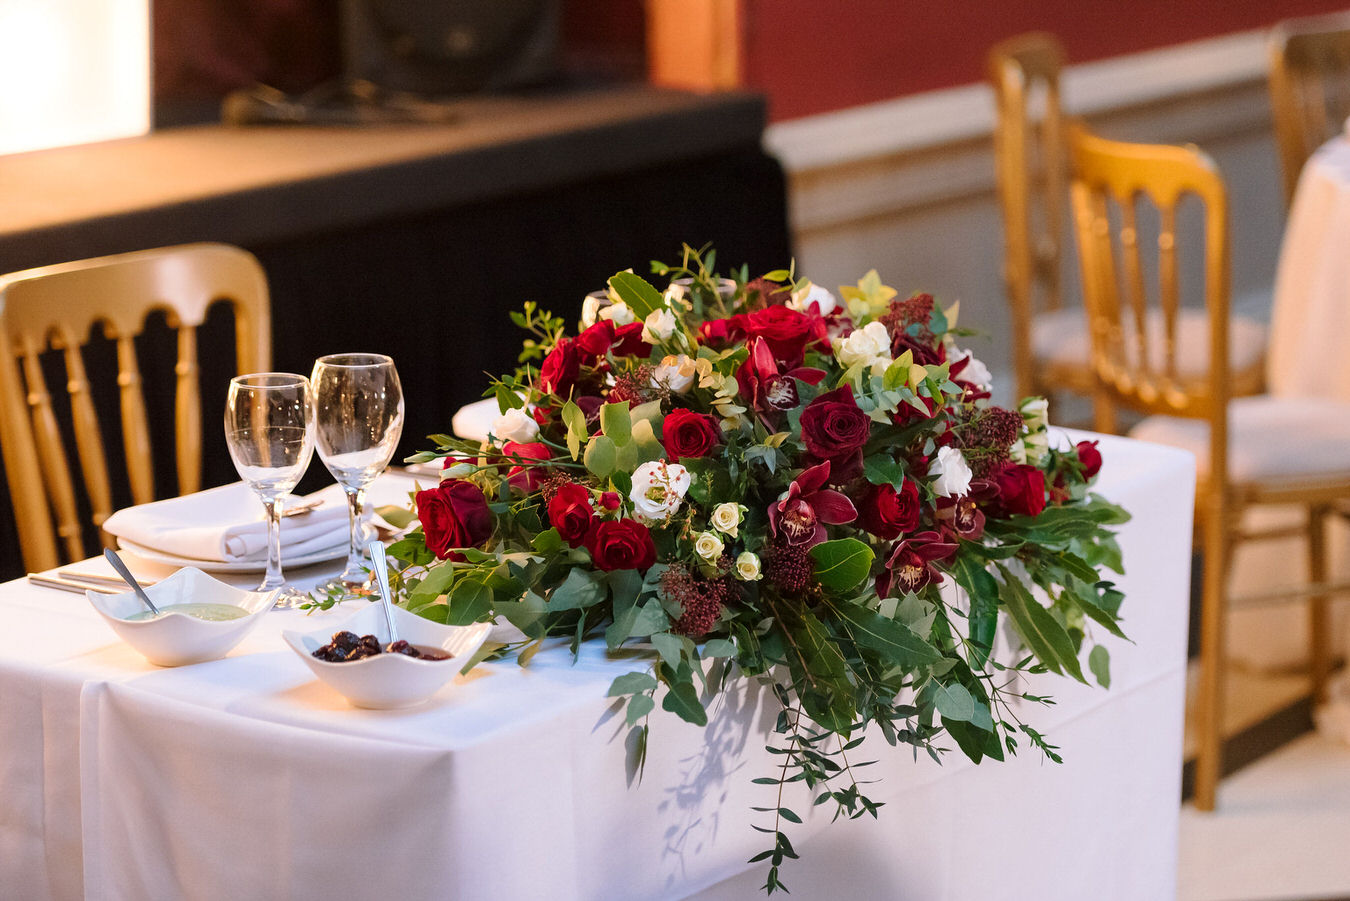 Sweetheart table setting with a winter red and white flower arrangement, a couple of glasses and white napkins